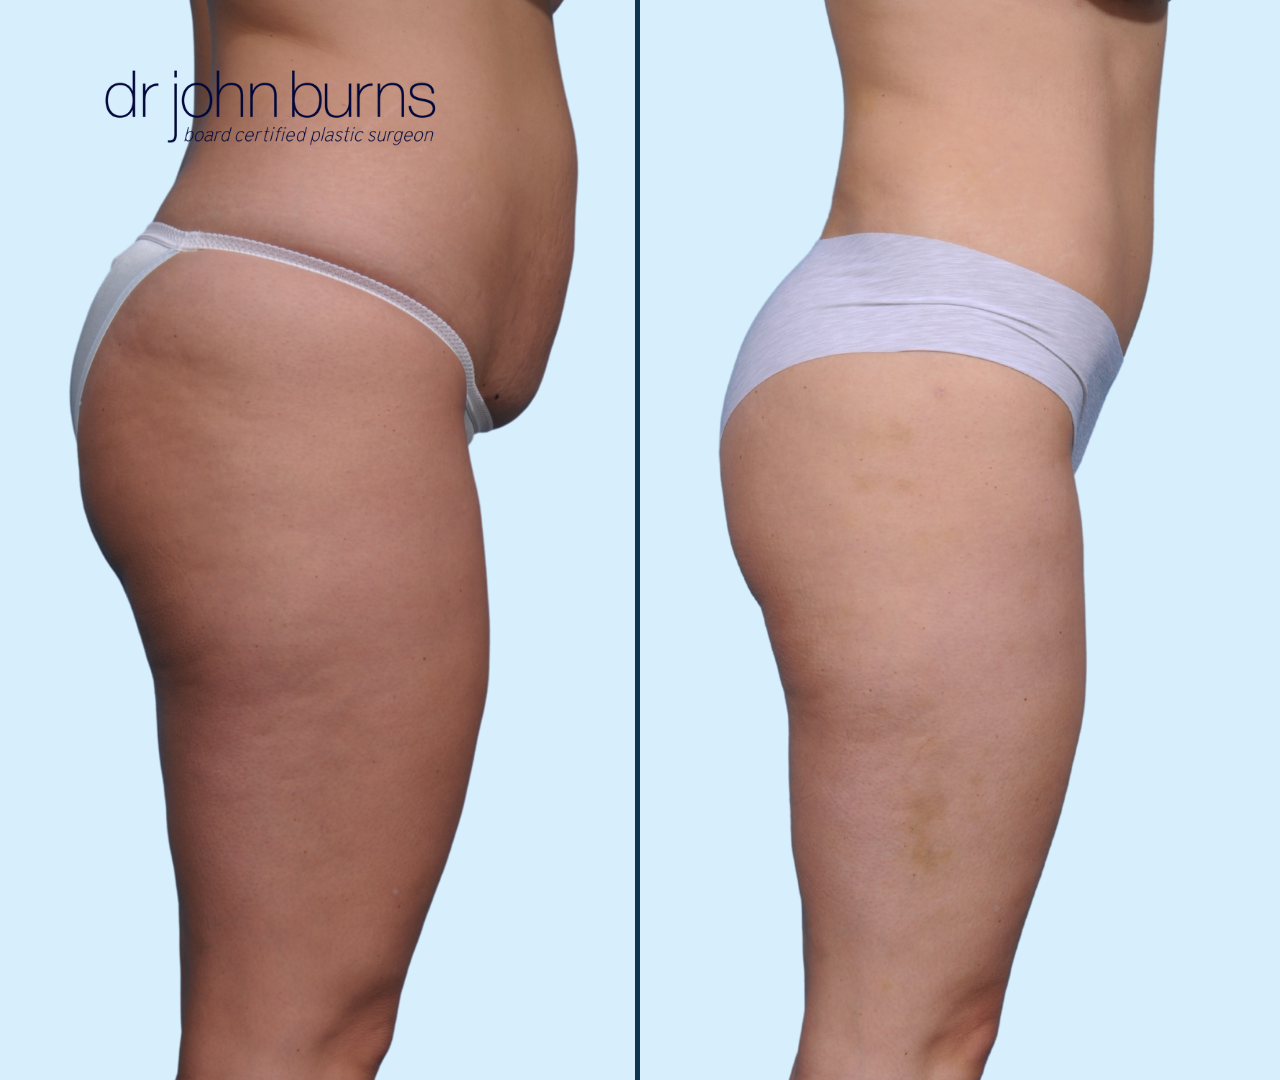 Case 26- Profile View- Before & After Full Tummy Tuck with Lipo by Dallas Plastic Surgeon, Dr. John Burns